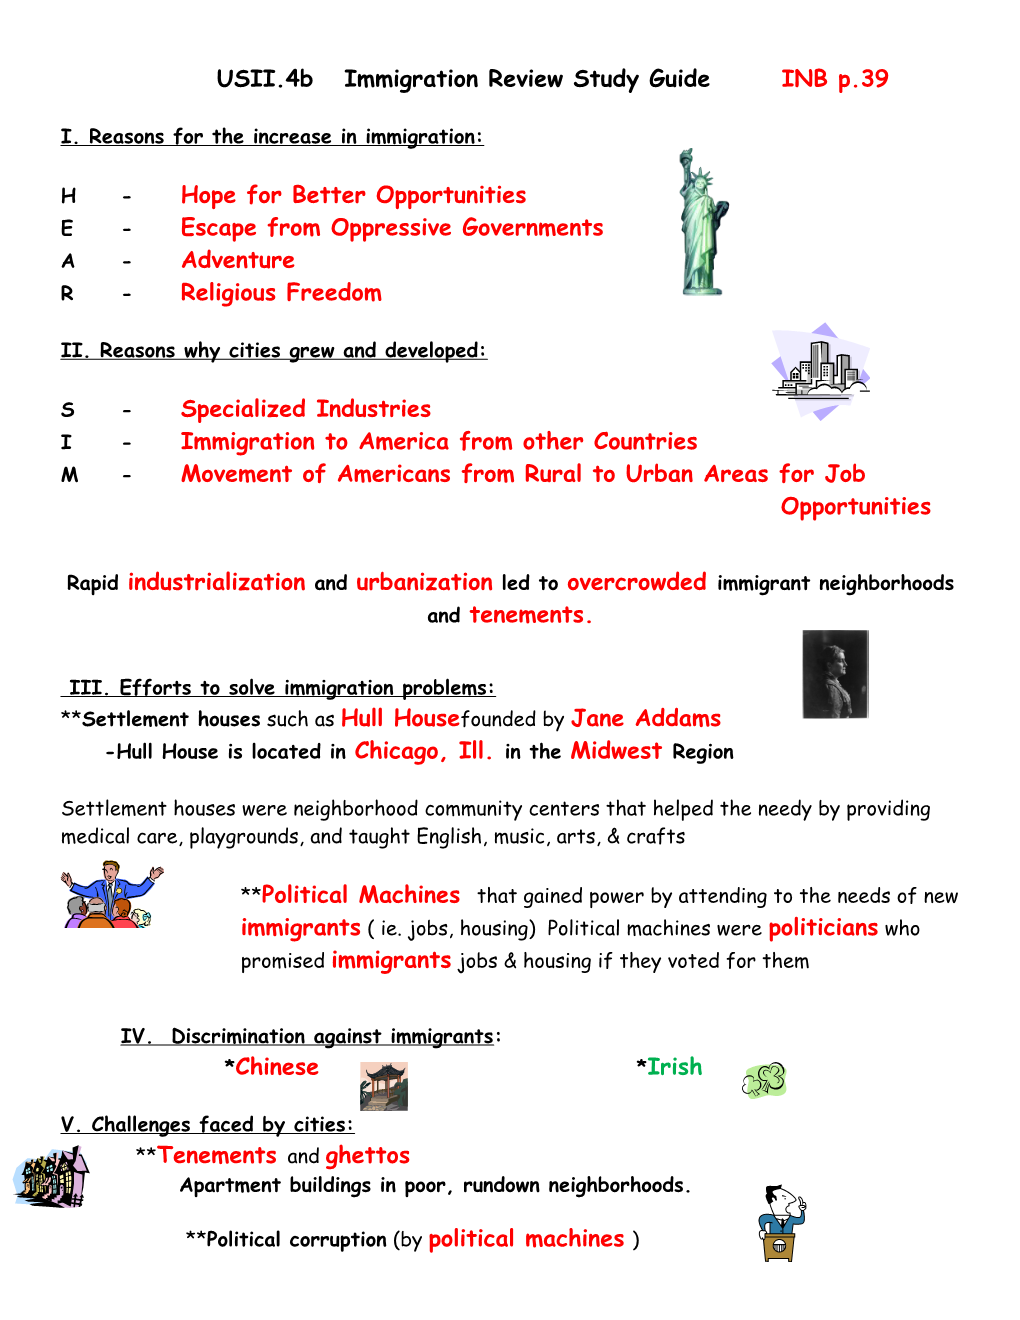 USII.4B Immigration Review Study Guide INB P.39